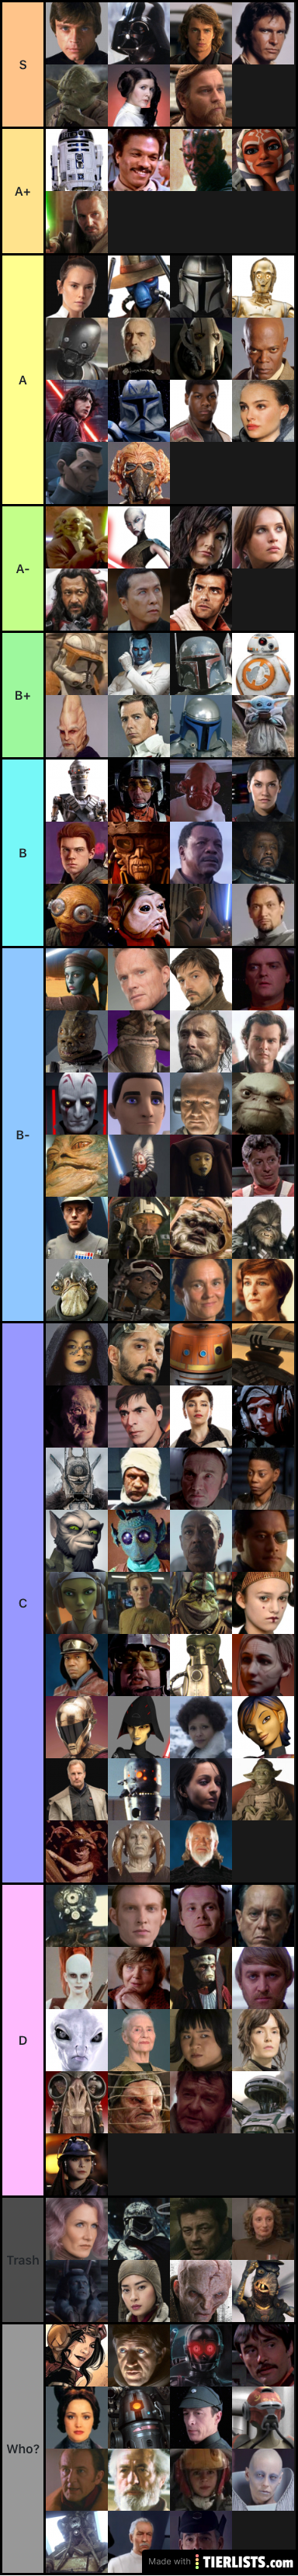 Star Wars Characters (Palpatine would be S Chewie would be A+)